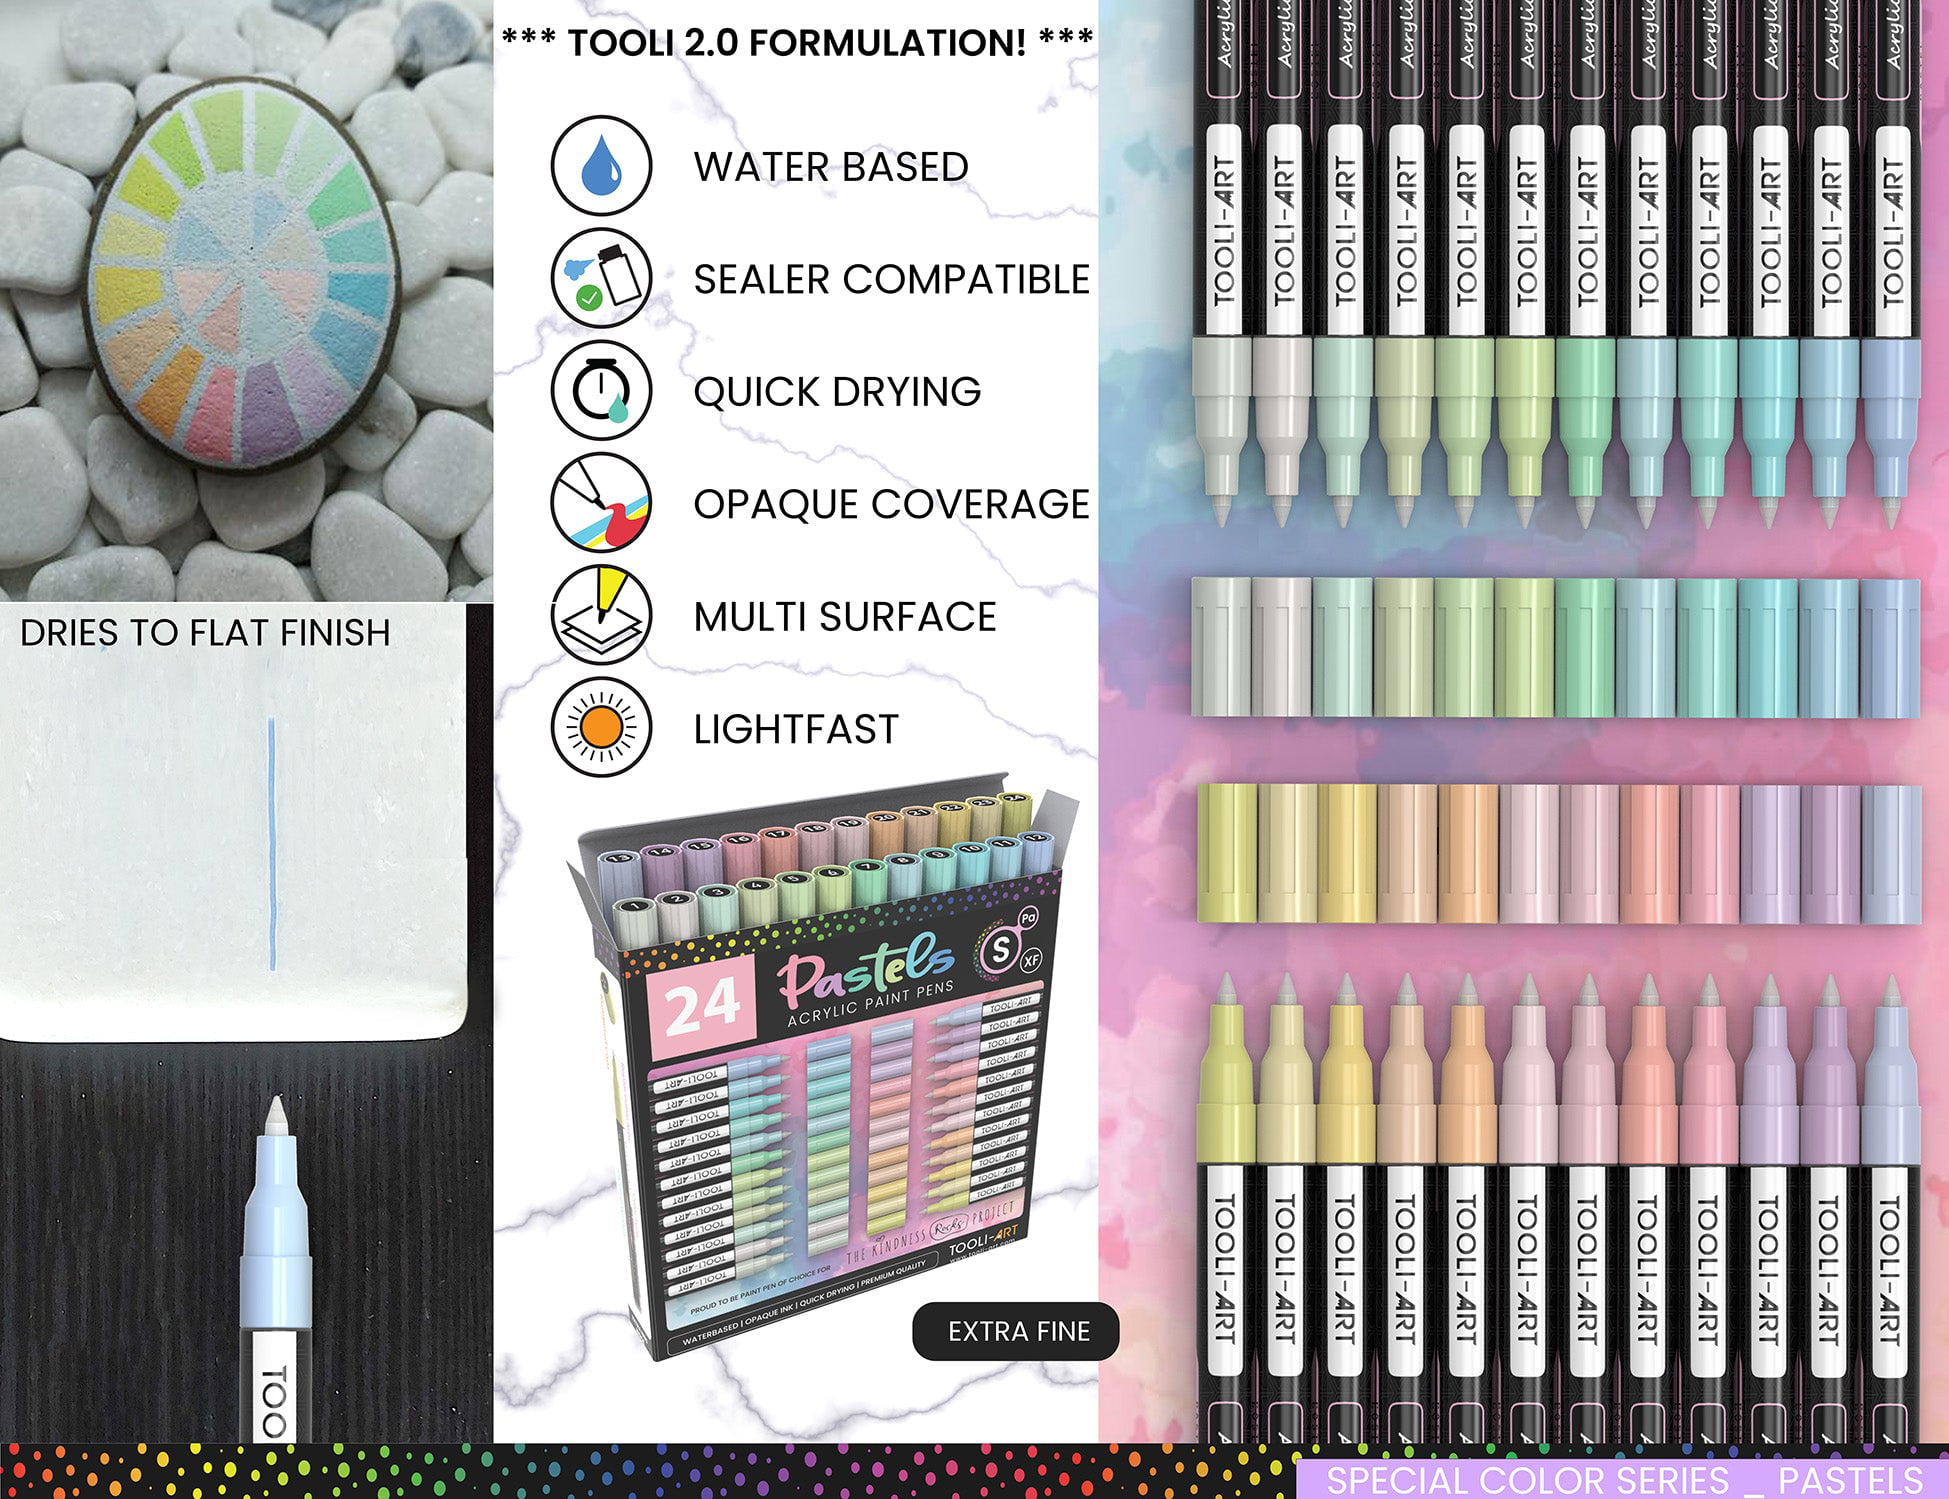 Loomini, Assorted Colors, Acrylic Paint Pens - 56 Colors - FineTip